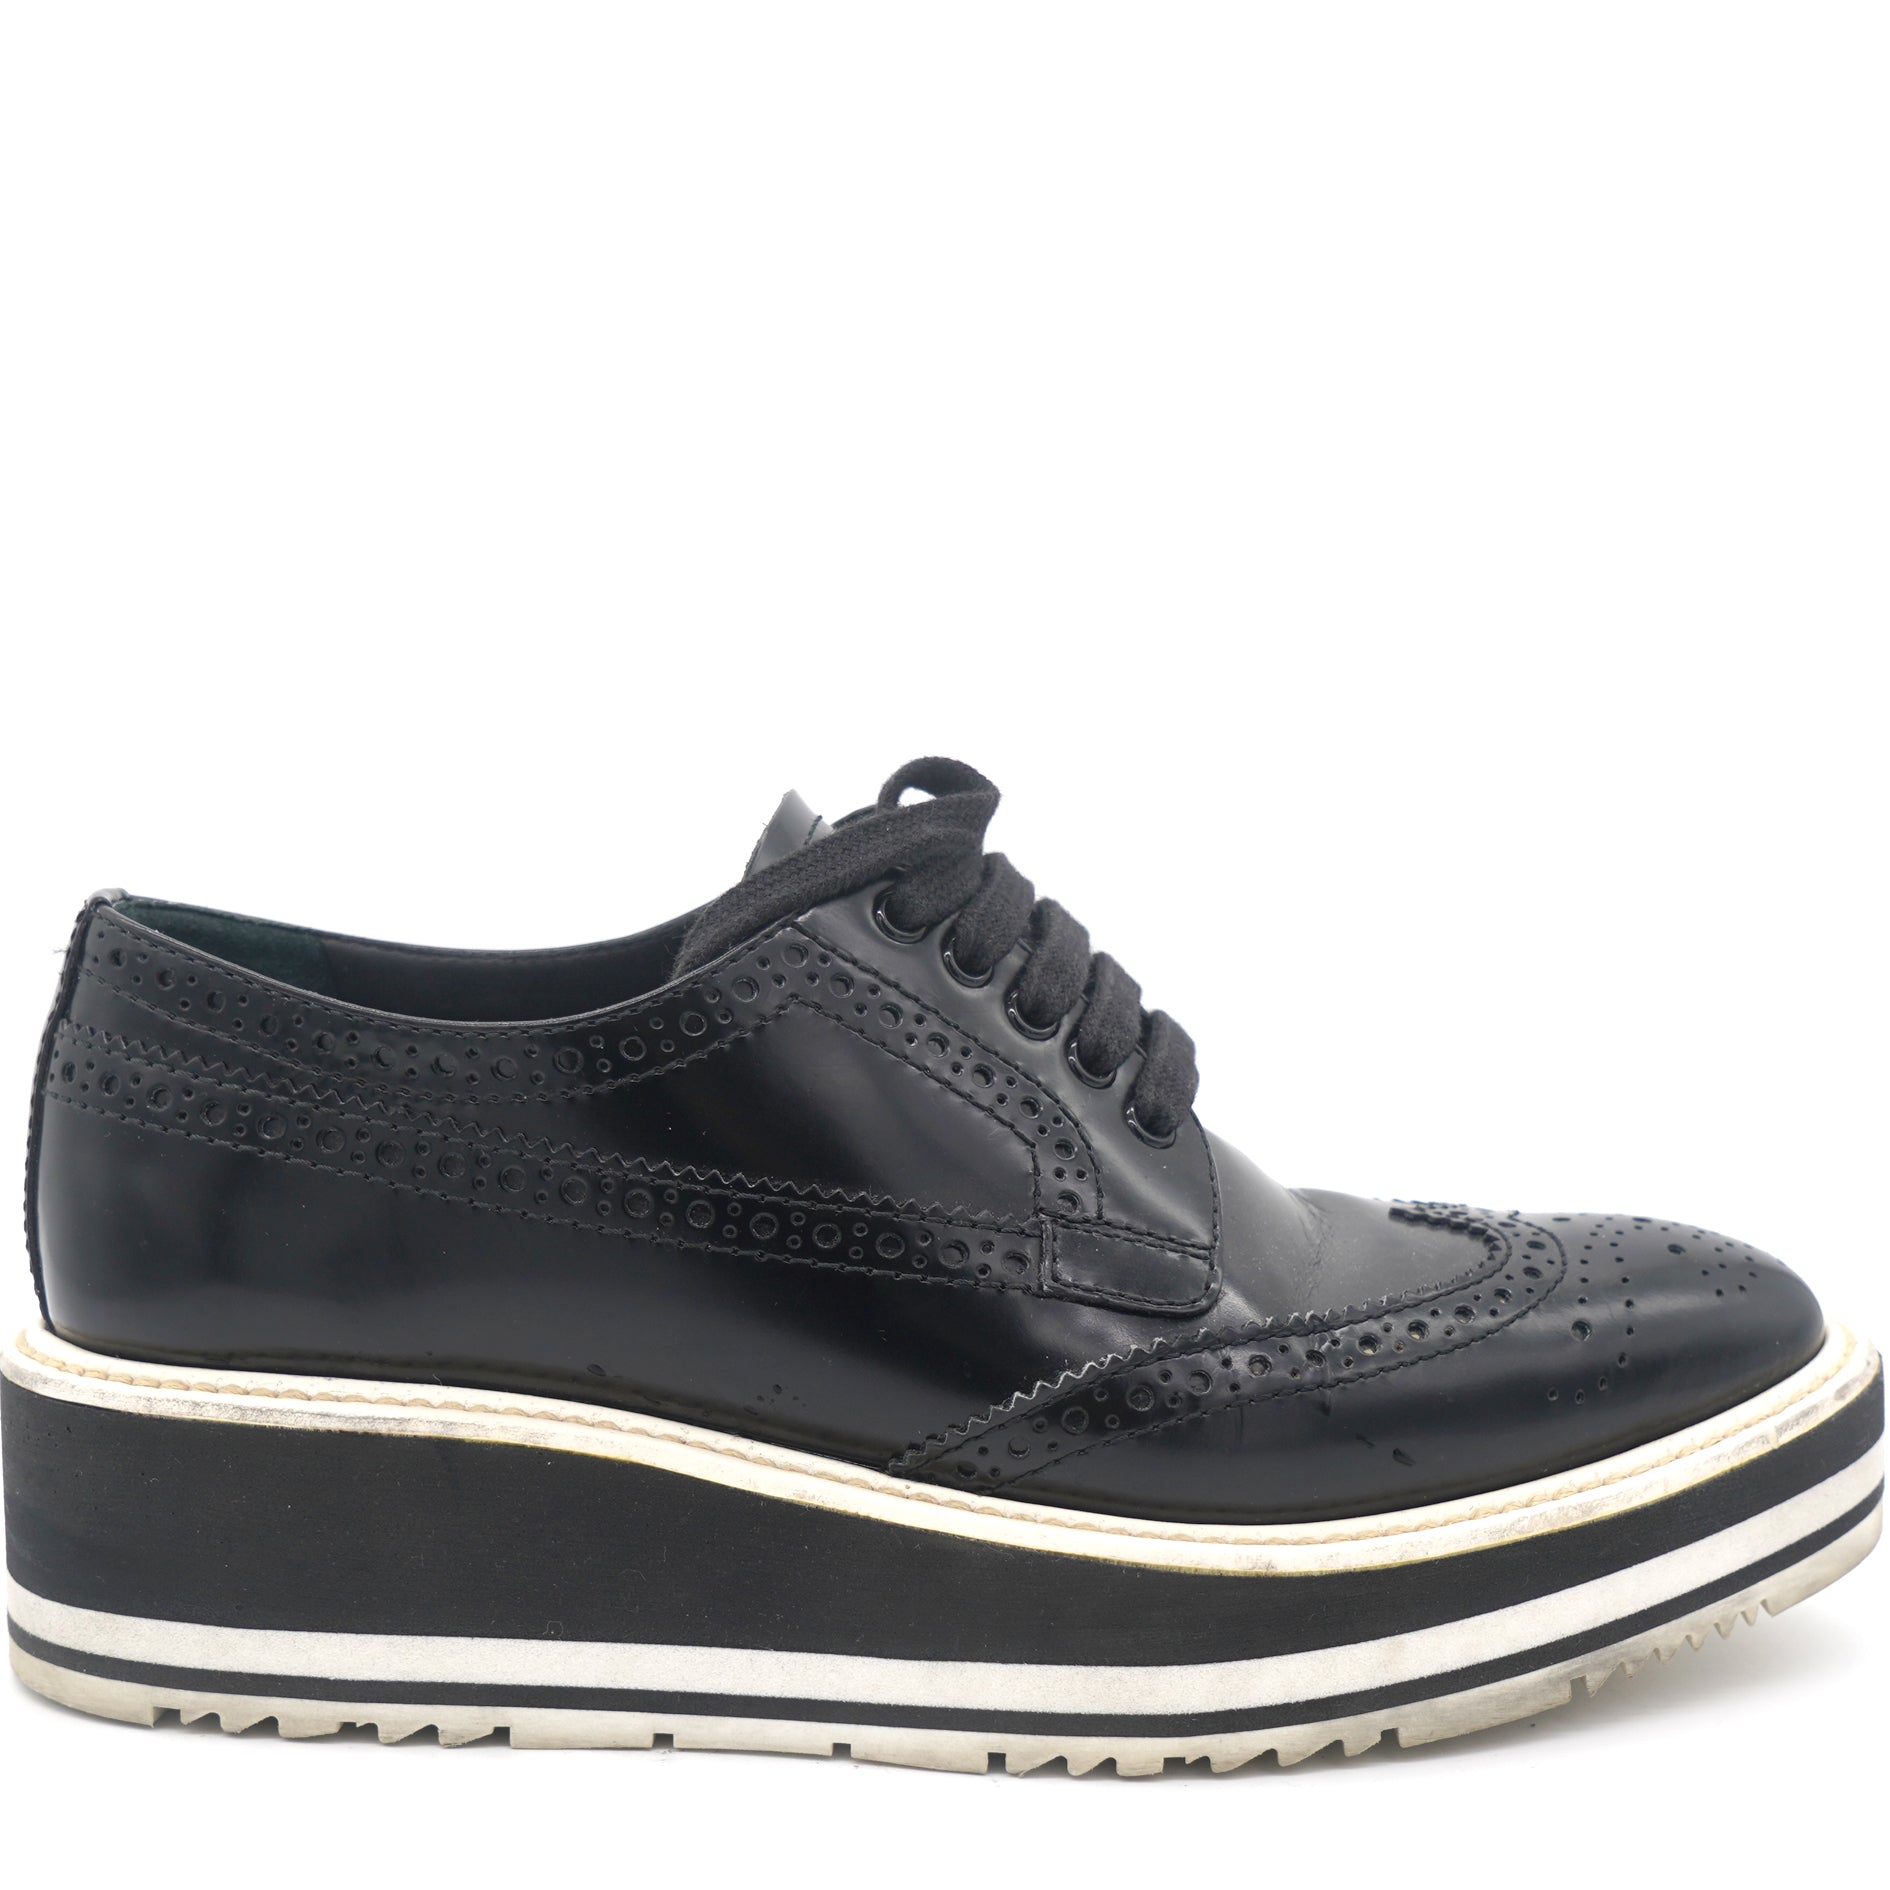 Black Leather Lace-Up Derby Shoes 35.5